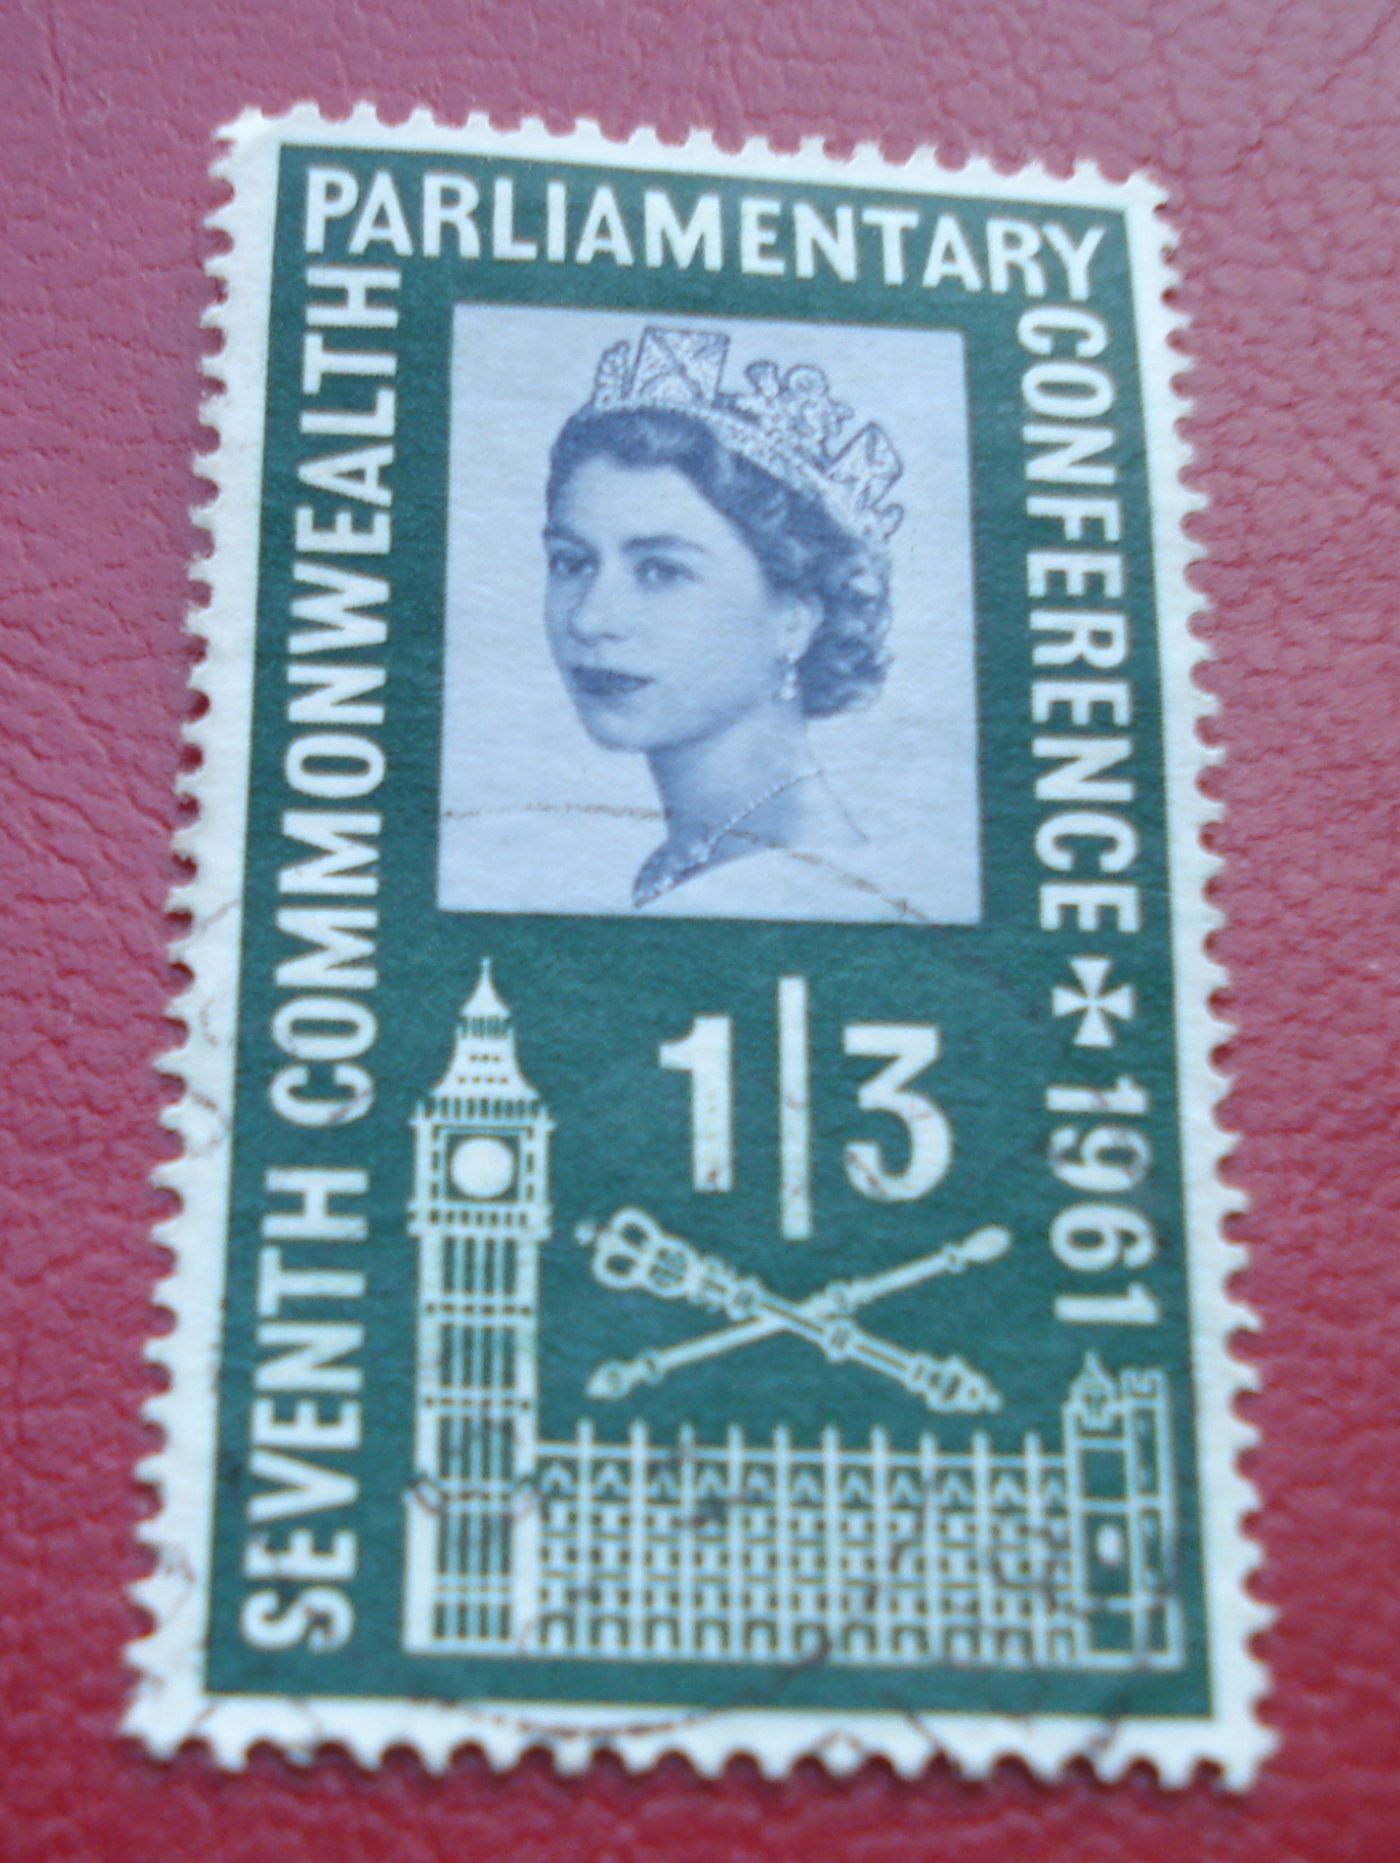 1 Shilling 3 Pence 1961 - Palace of Westminster, 1961 - Great Britain ...